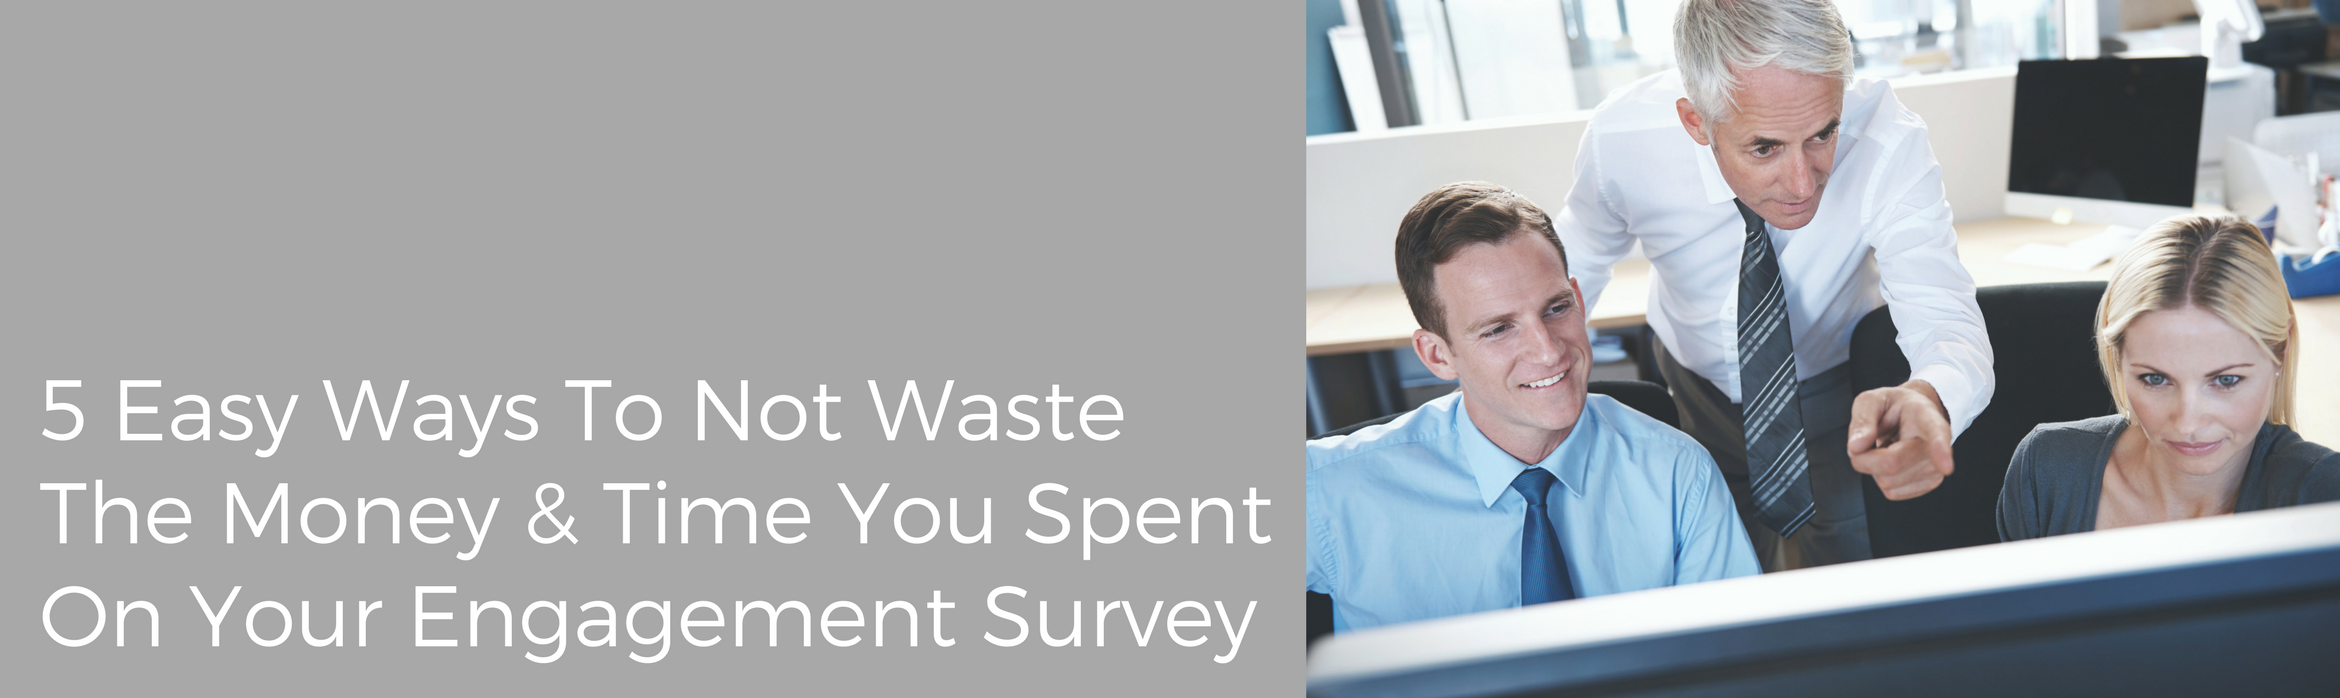 5 Easy Ways to Not Waste the Money & Time You Spent on Your Engagement Survey